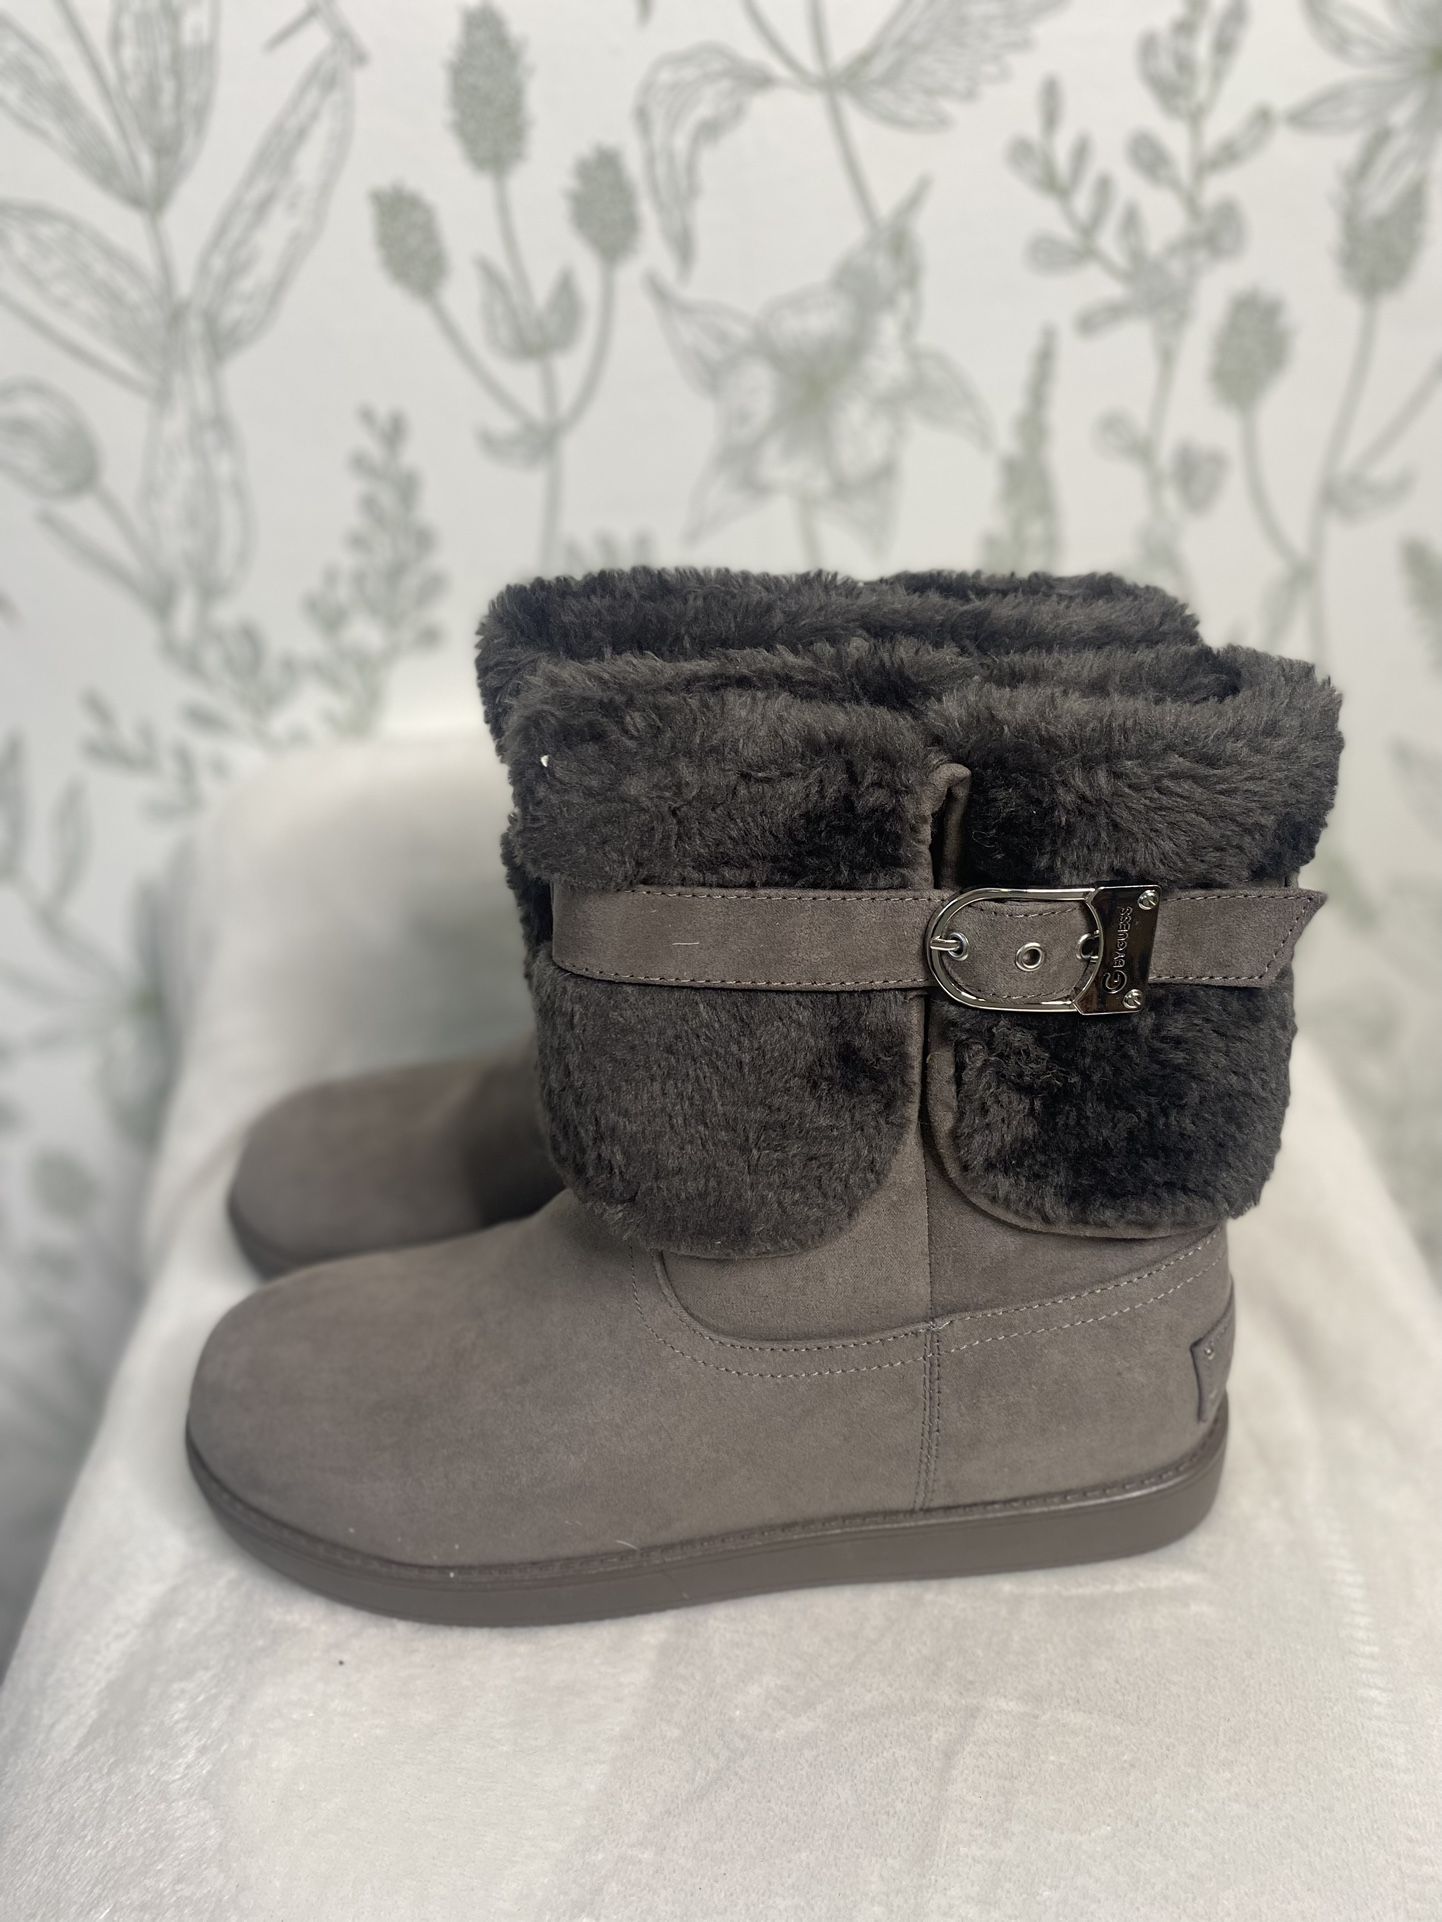 Guess Women's Aussie Faux Fur Round Toe Ankle Boots Gray Size 9.5 M New 